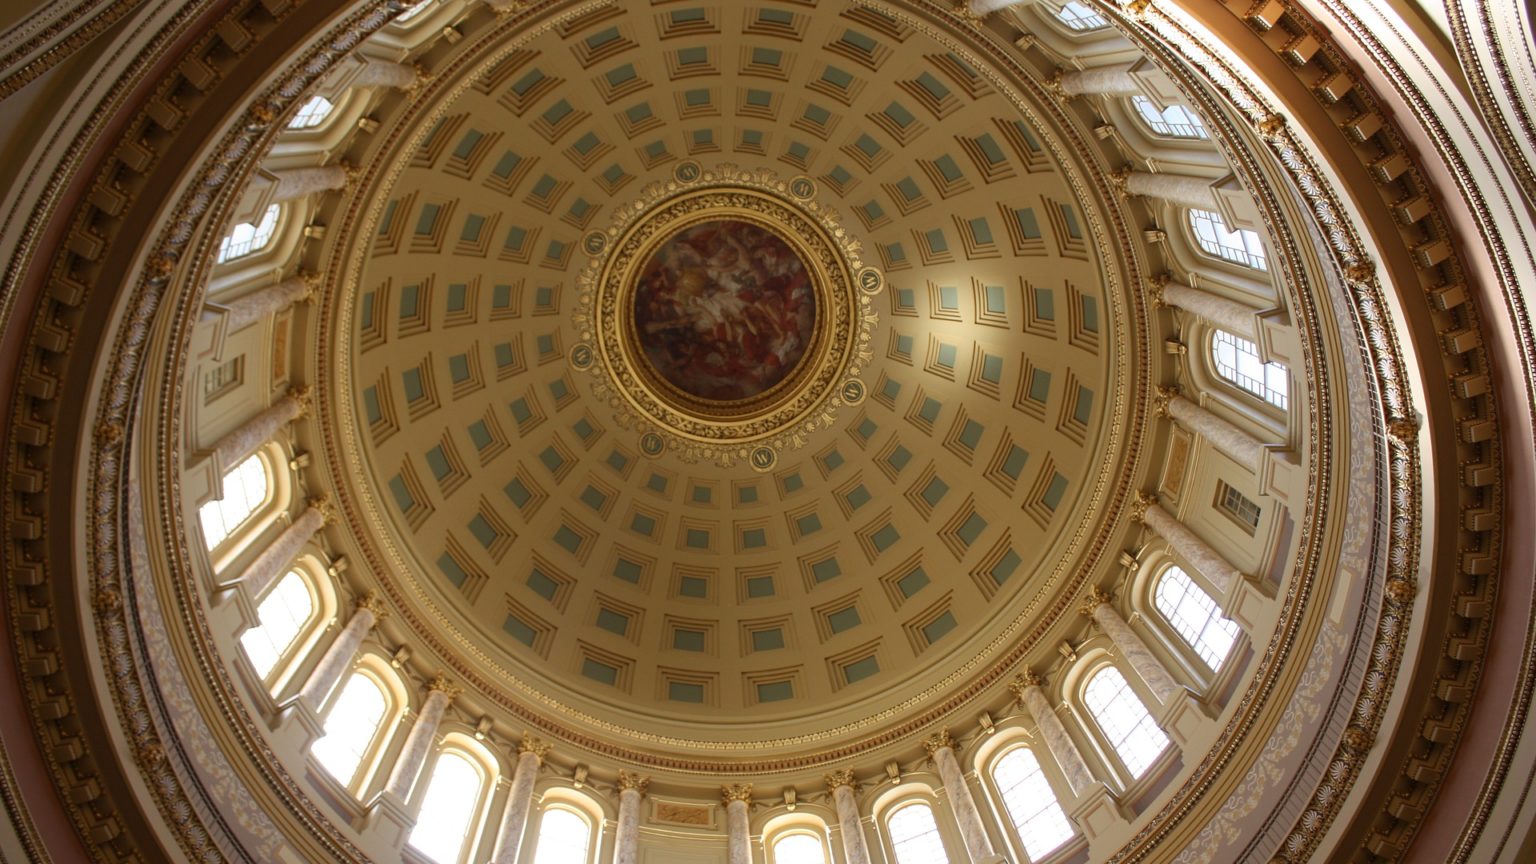 photo of the decorative dome ceiling of the Wisconsin State Capitol building